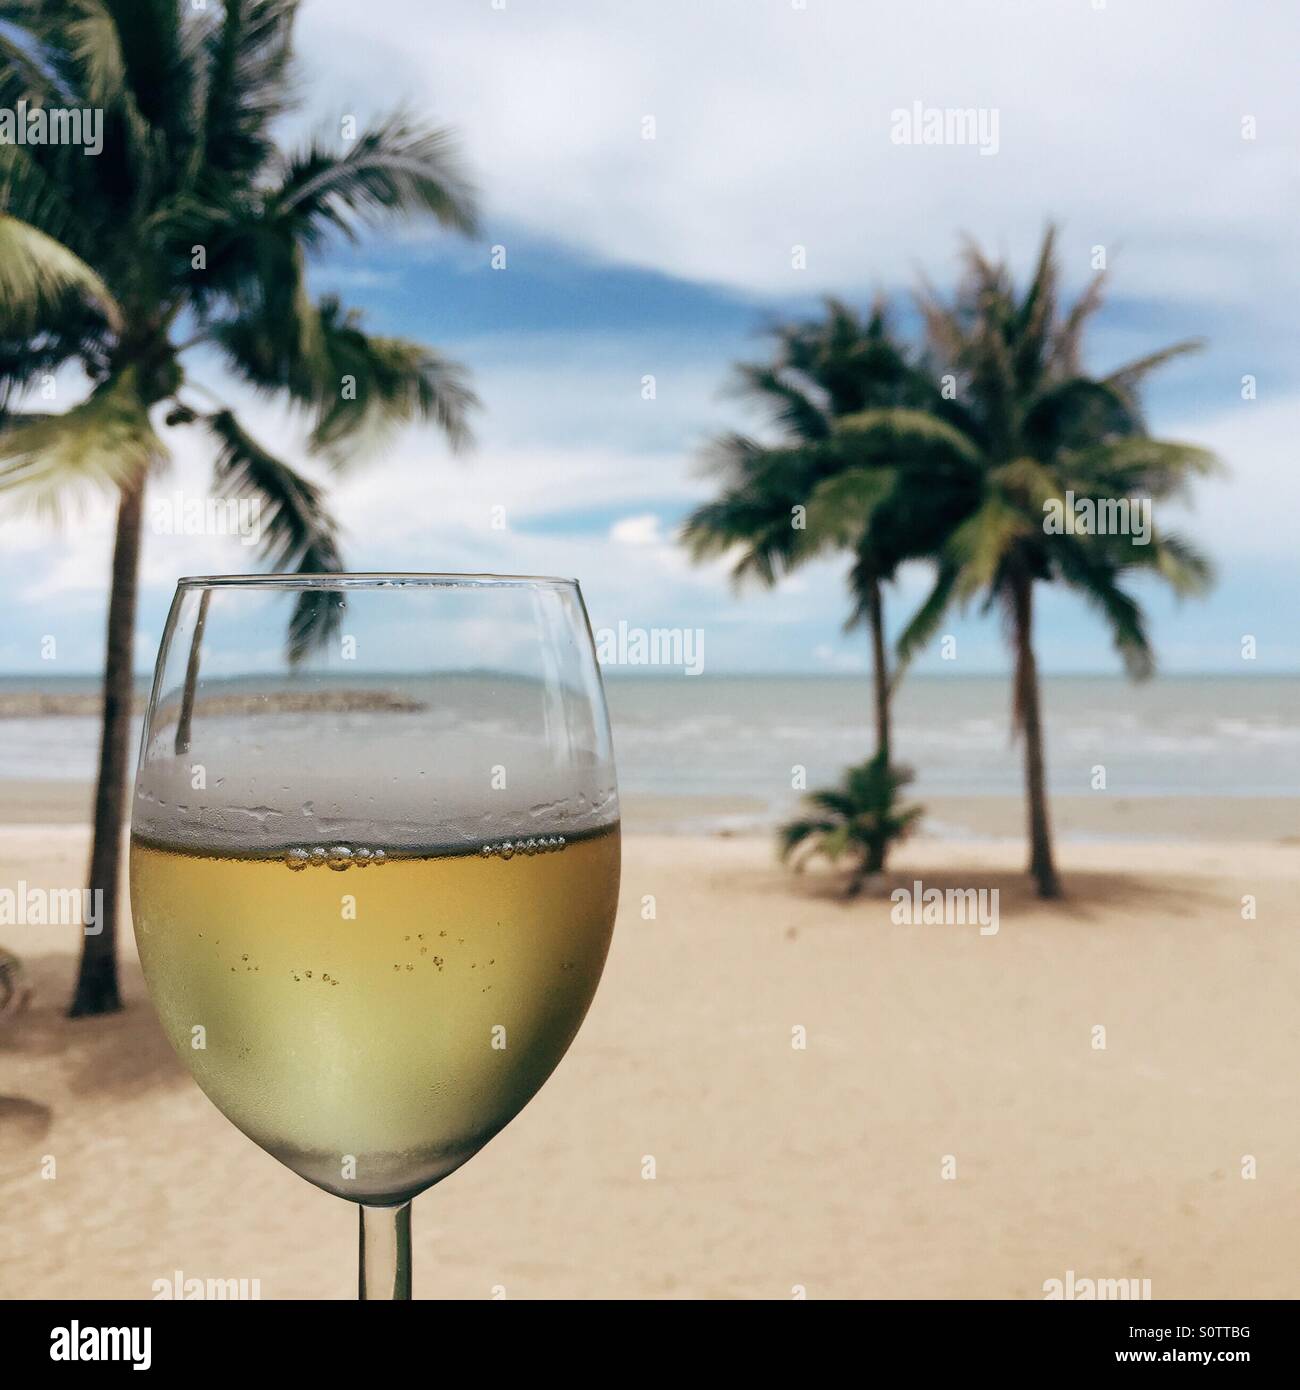 Beach front view with a glass of white wine Stock Photo